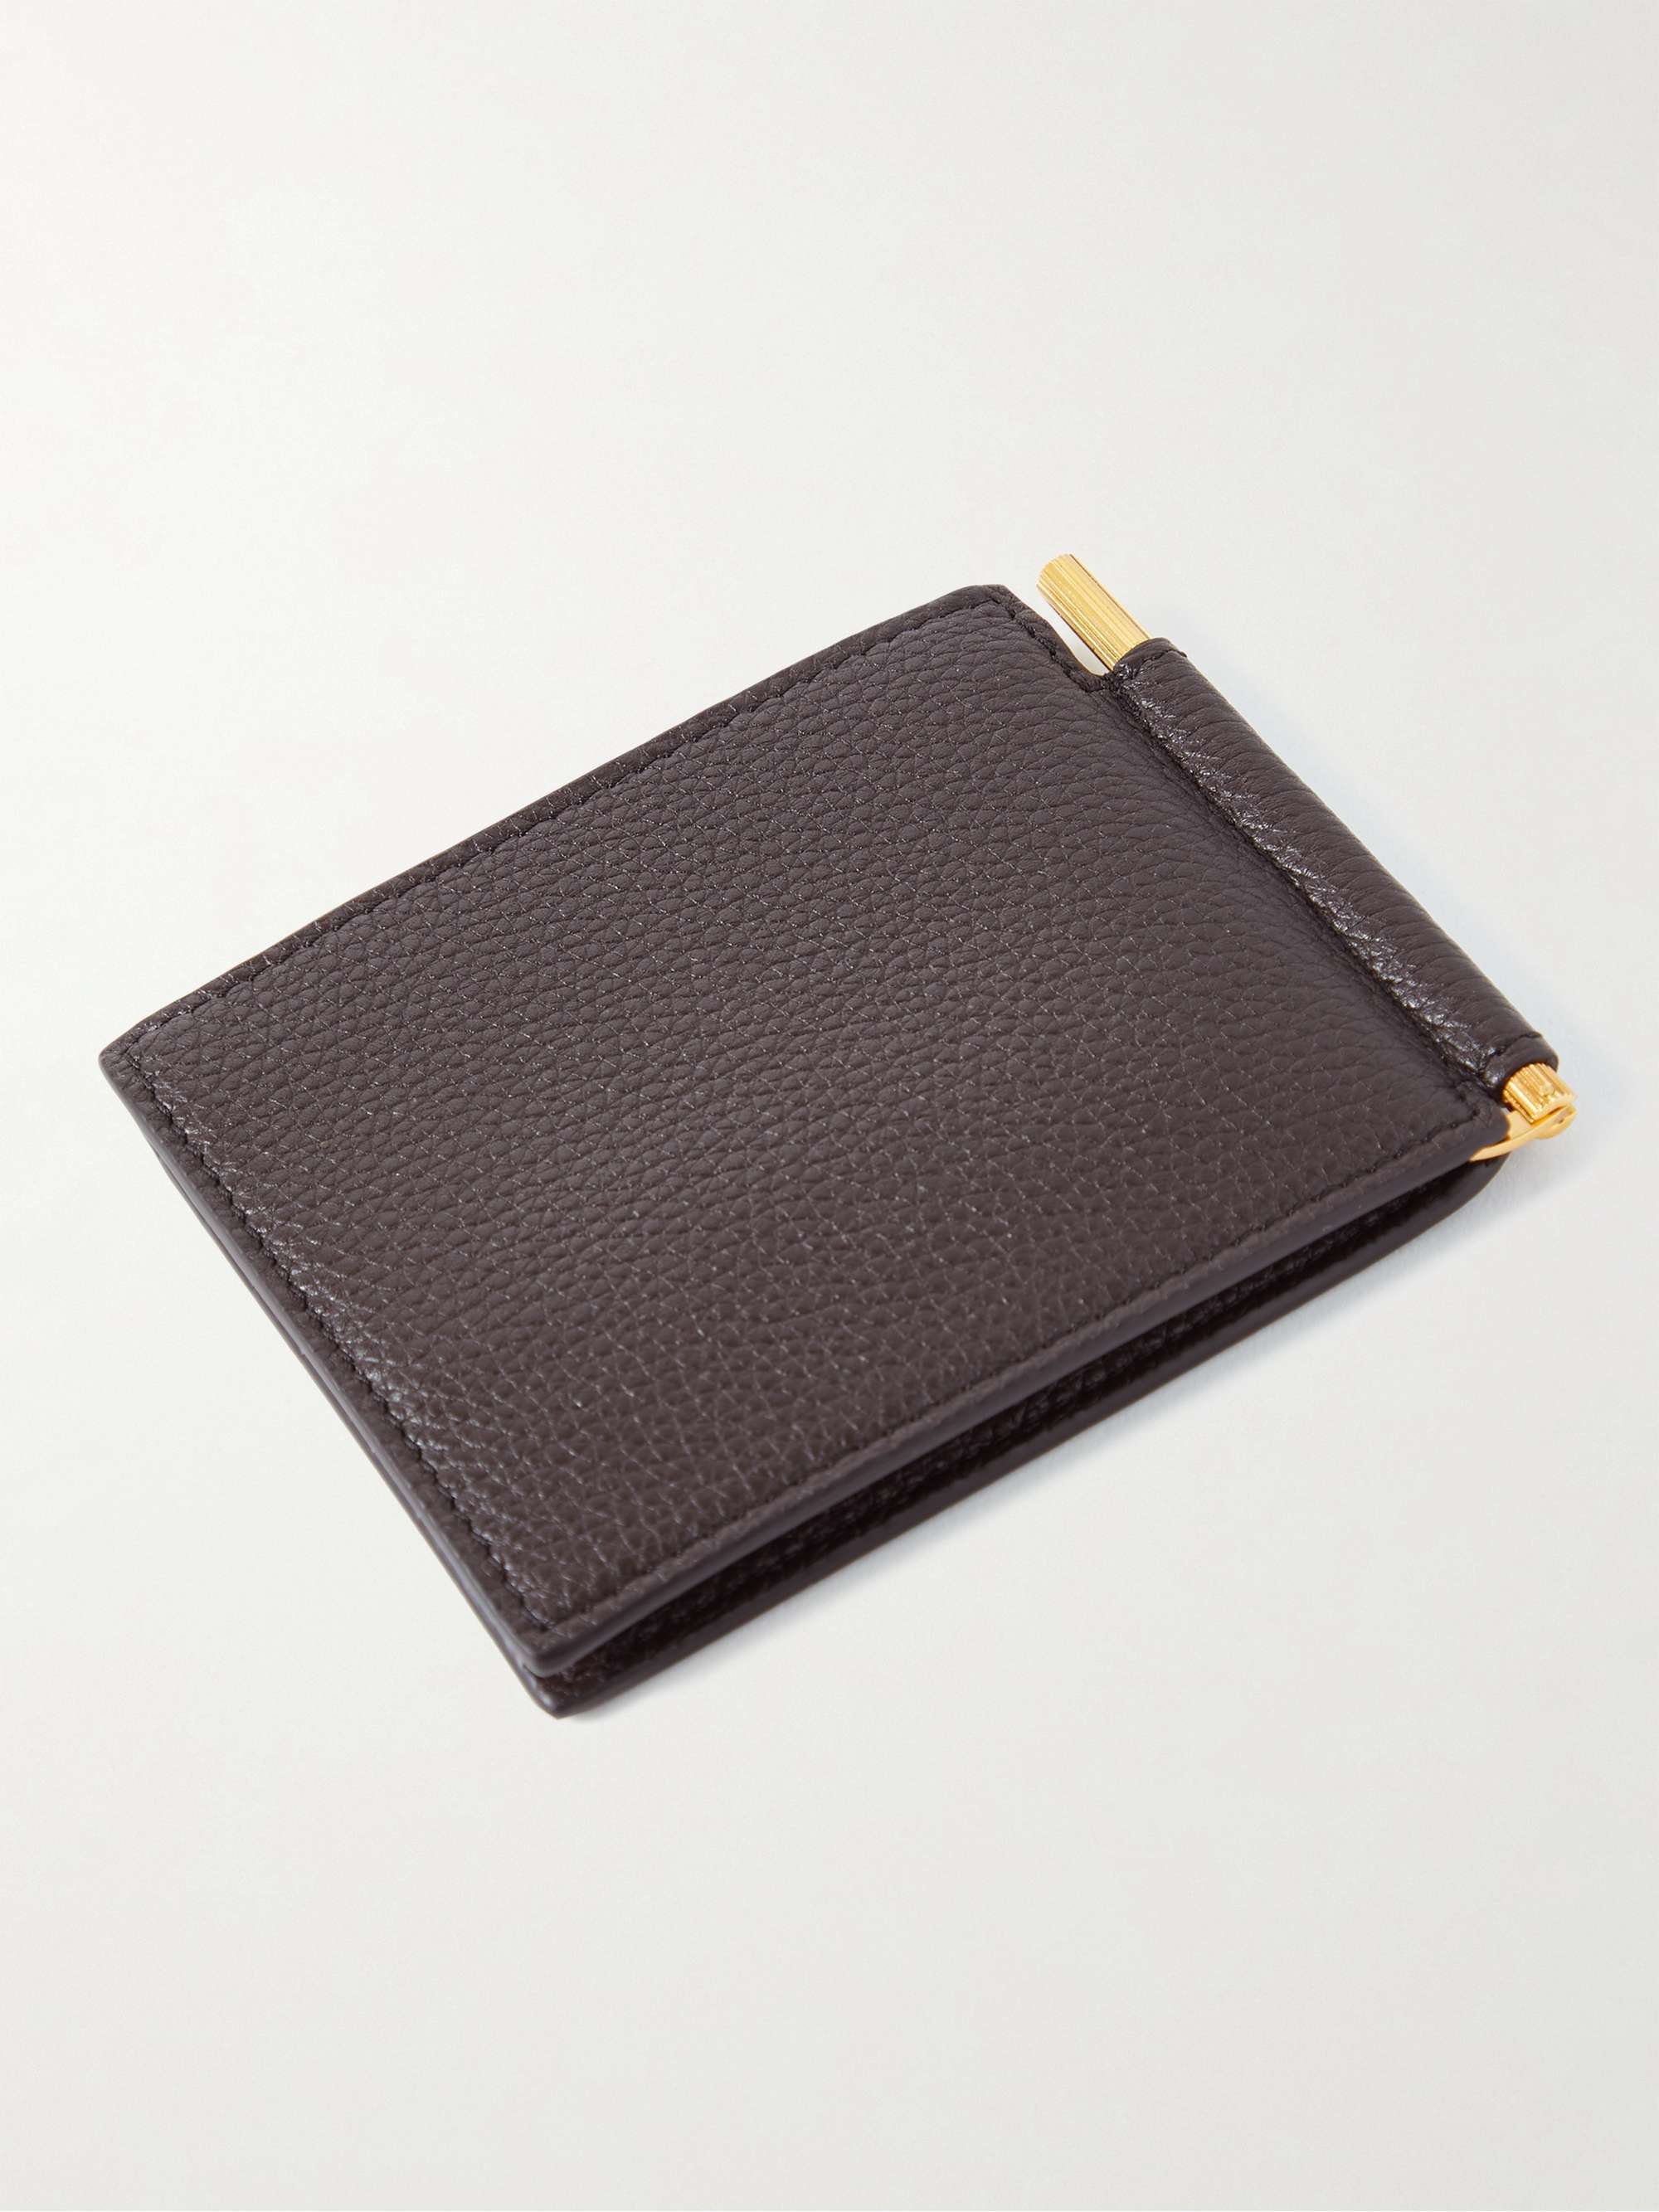 TOM FORD Full-Grain Leather Billfold Wallet with Money Clip